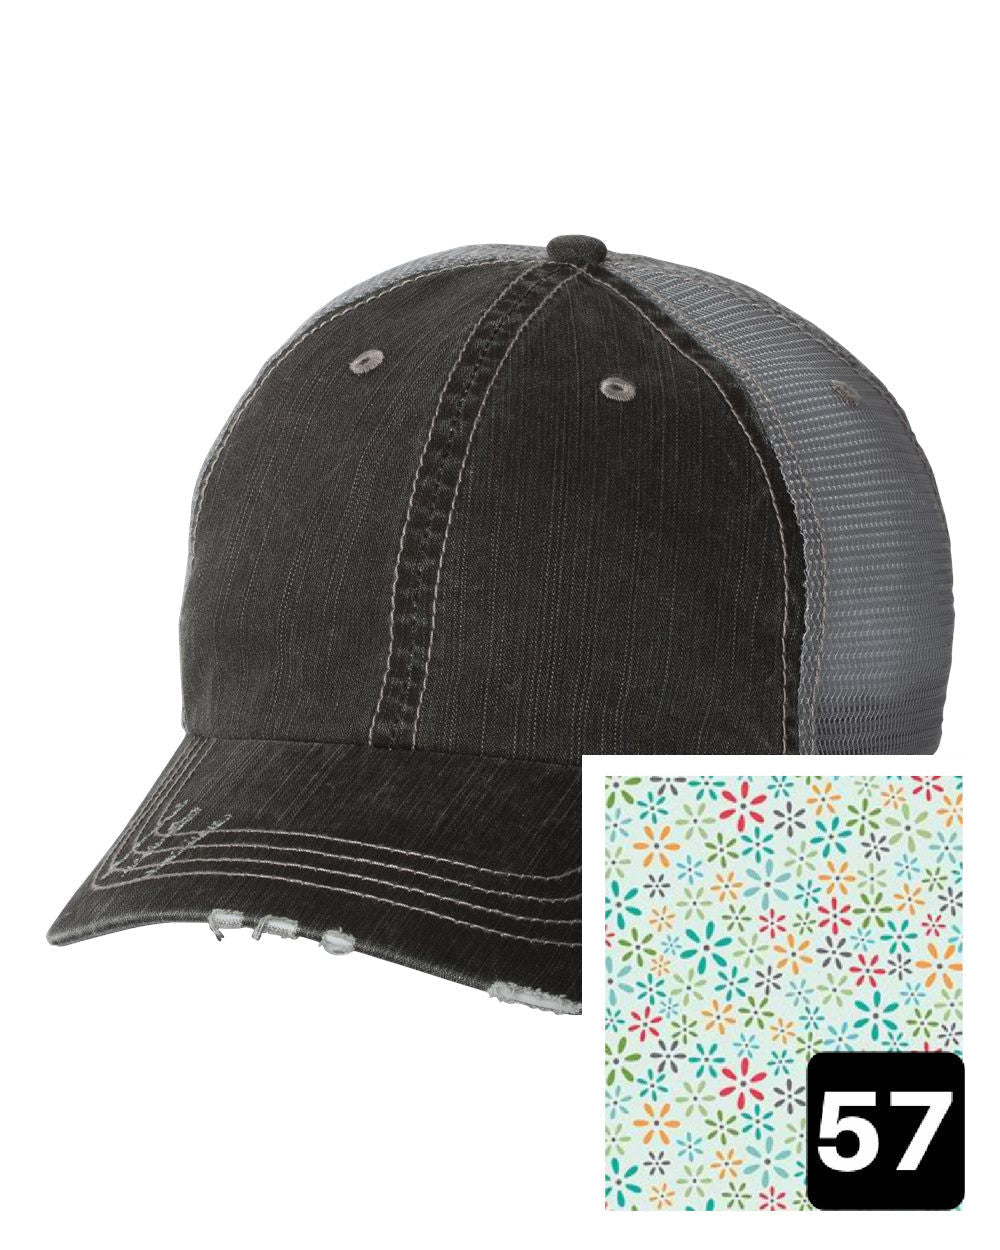 gray distressed trucker hat with white daisy on yellow fabric state of South Carolina